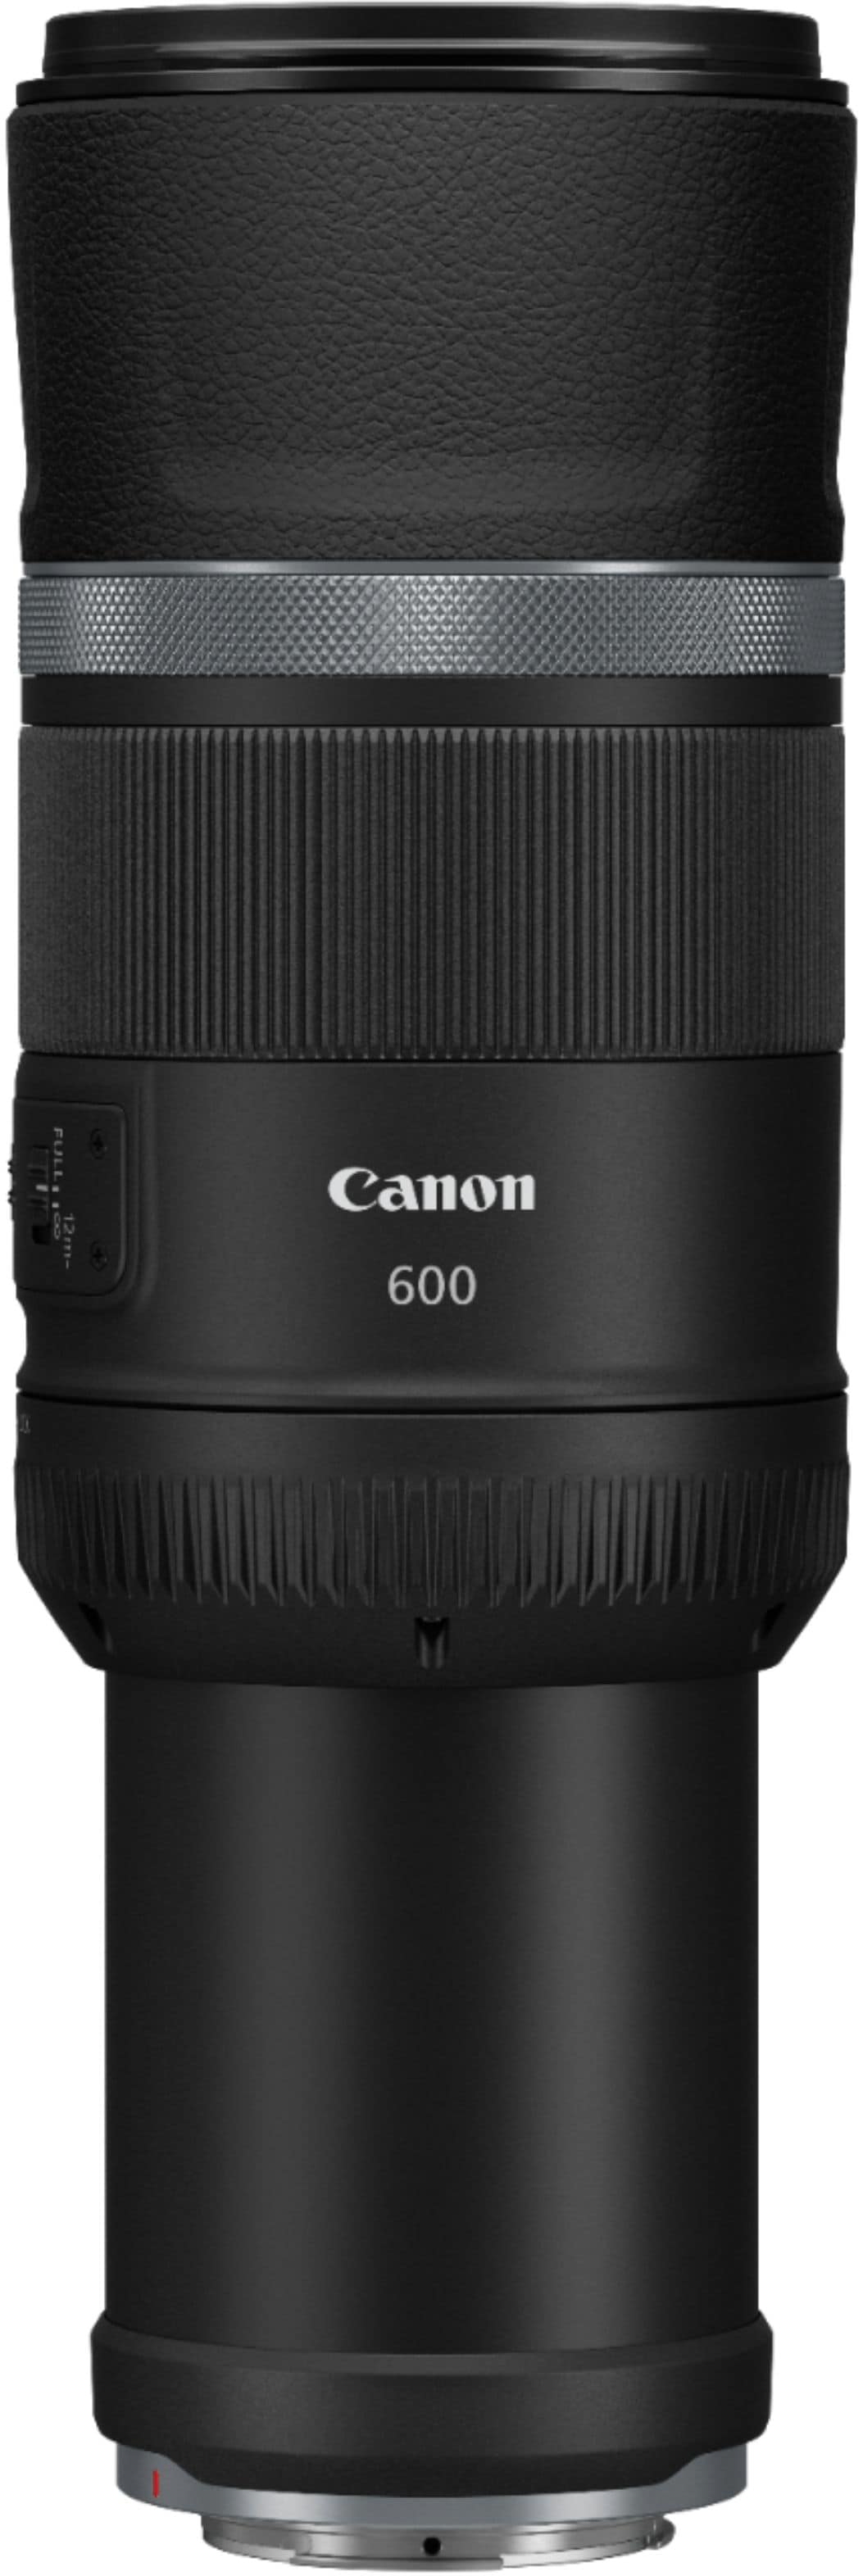 Canon - RF 600mm f/11 IS STM Telephoto Lens for EOS R Cameras - Black_6